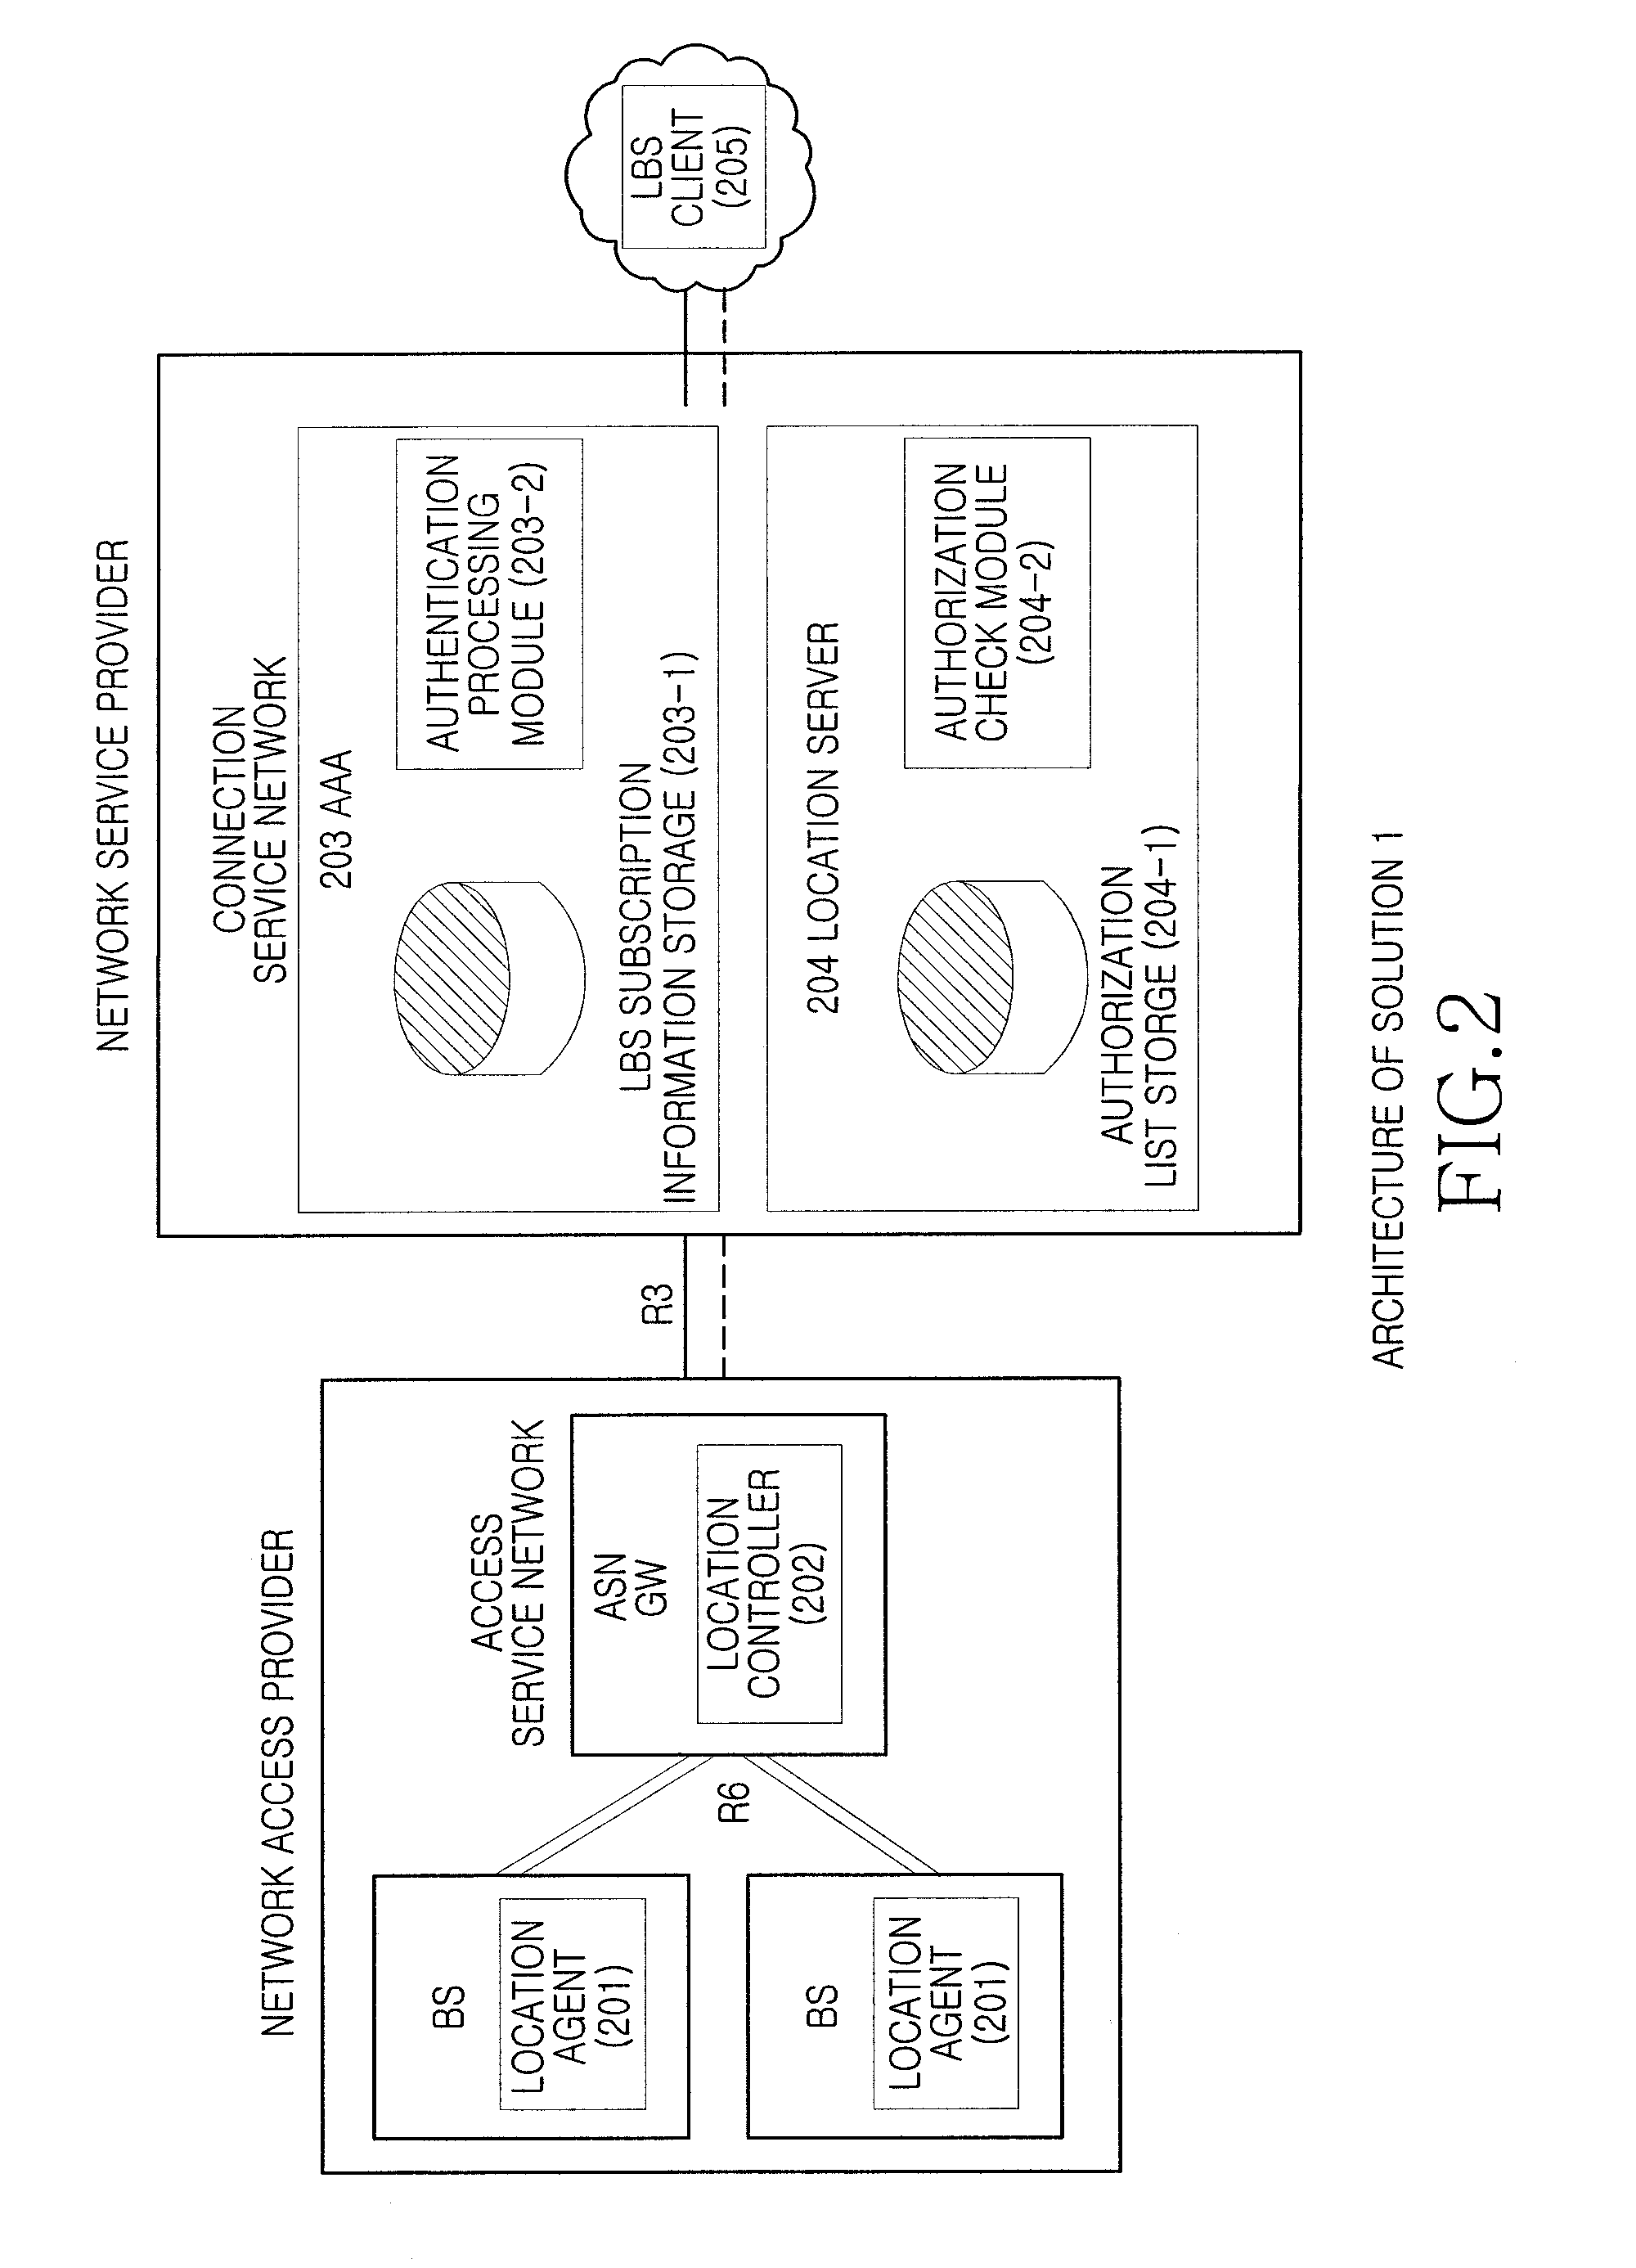 Method and device for authentication and authorization checking on LBS in Wimax network